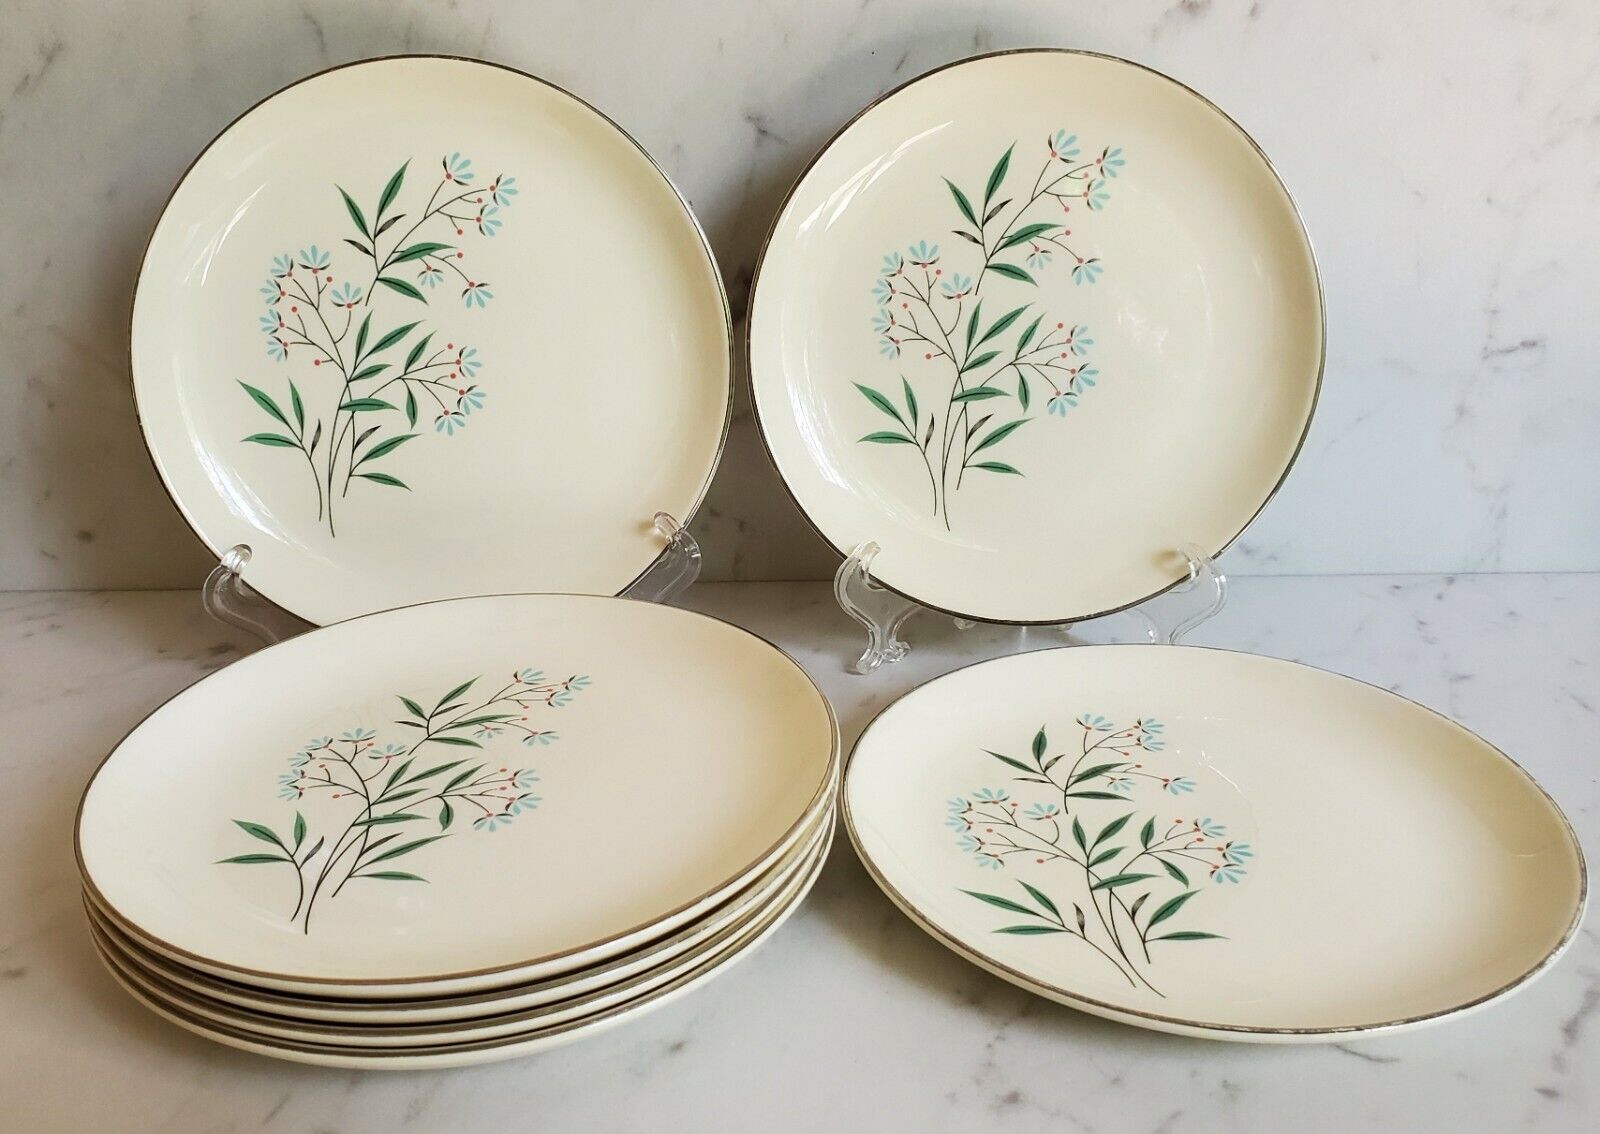 Vintage MCM Dessert Plates Featuring Green Leaves and Pale Blue Flowers